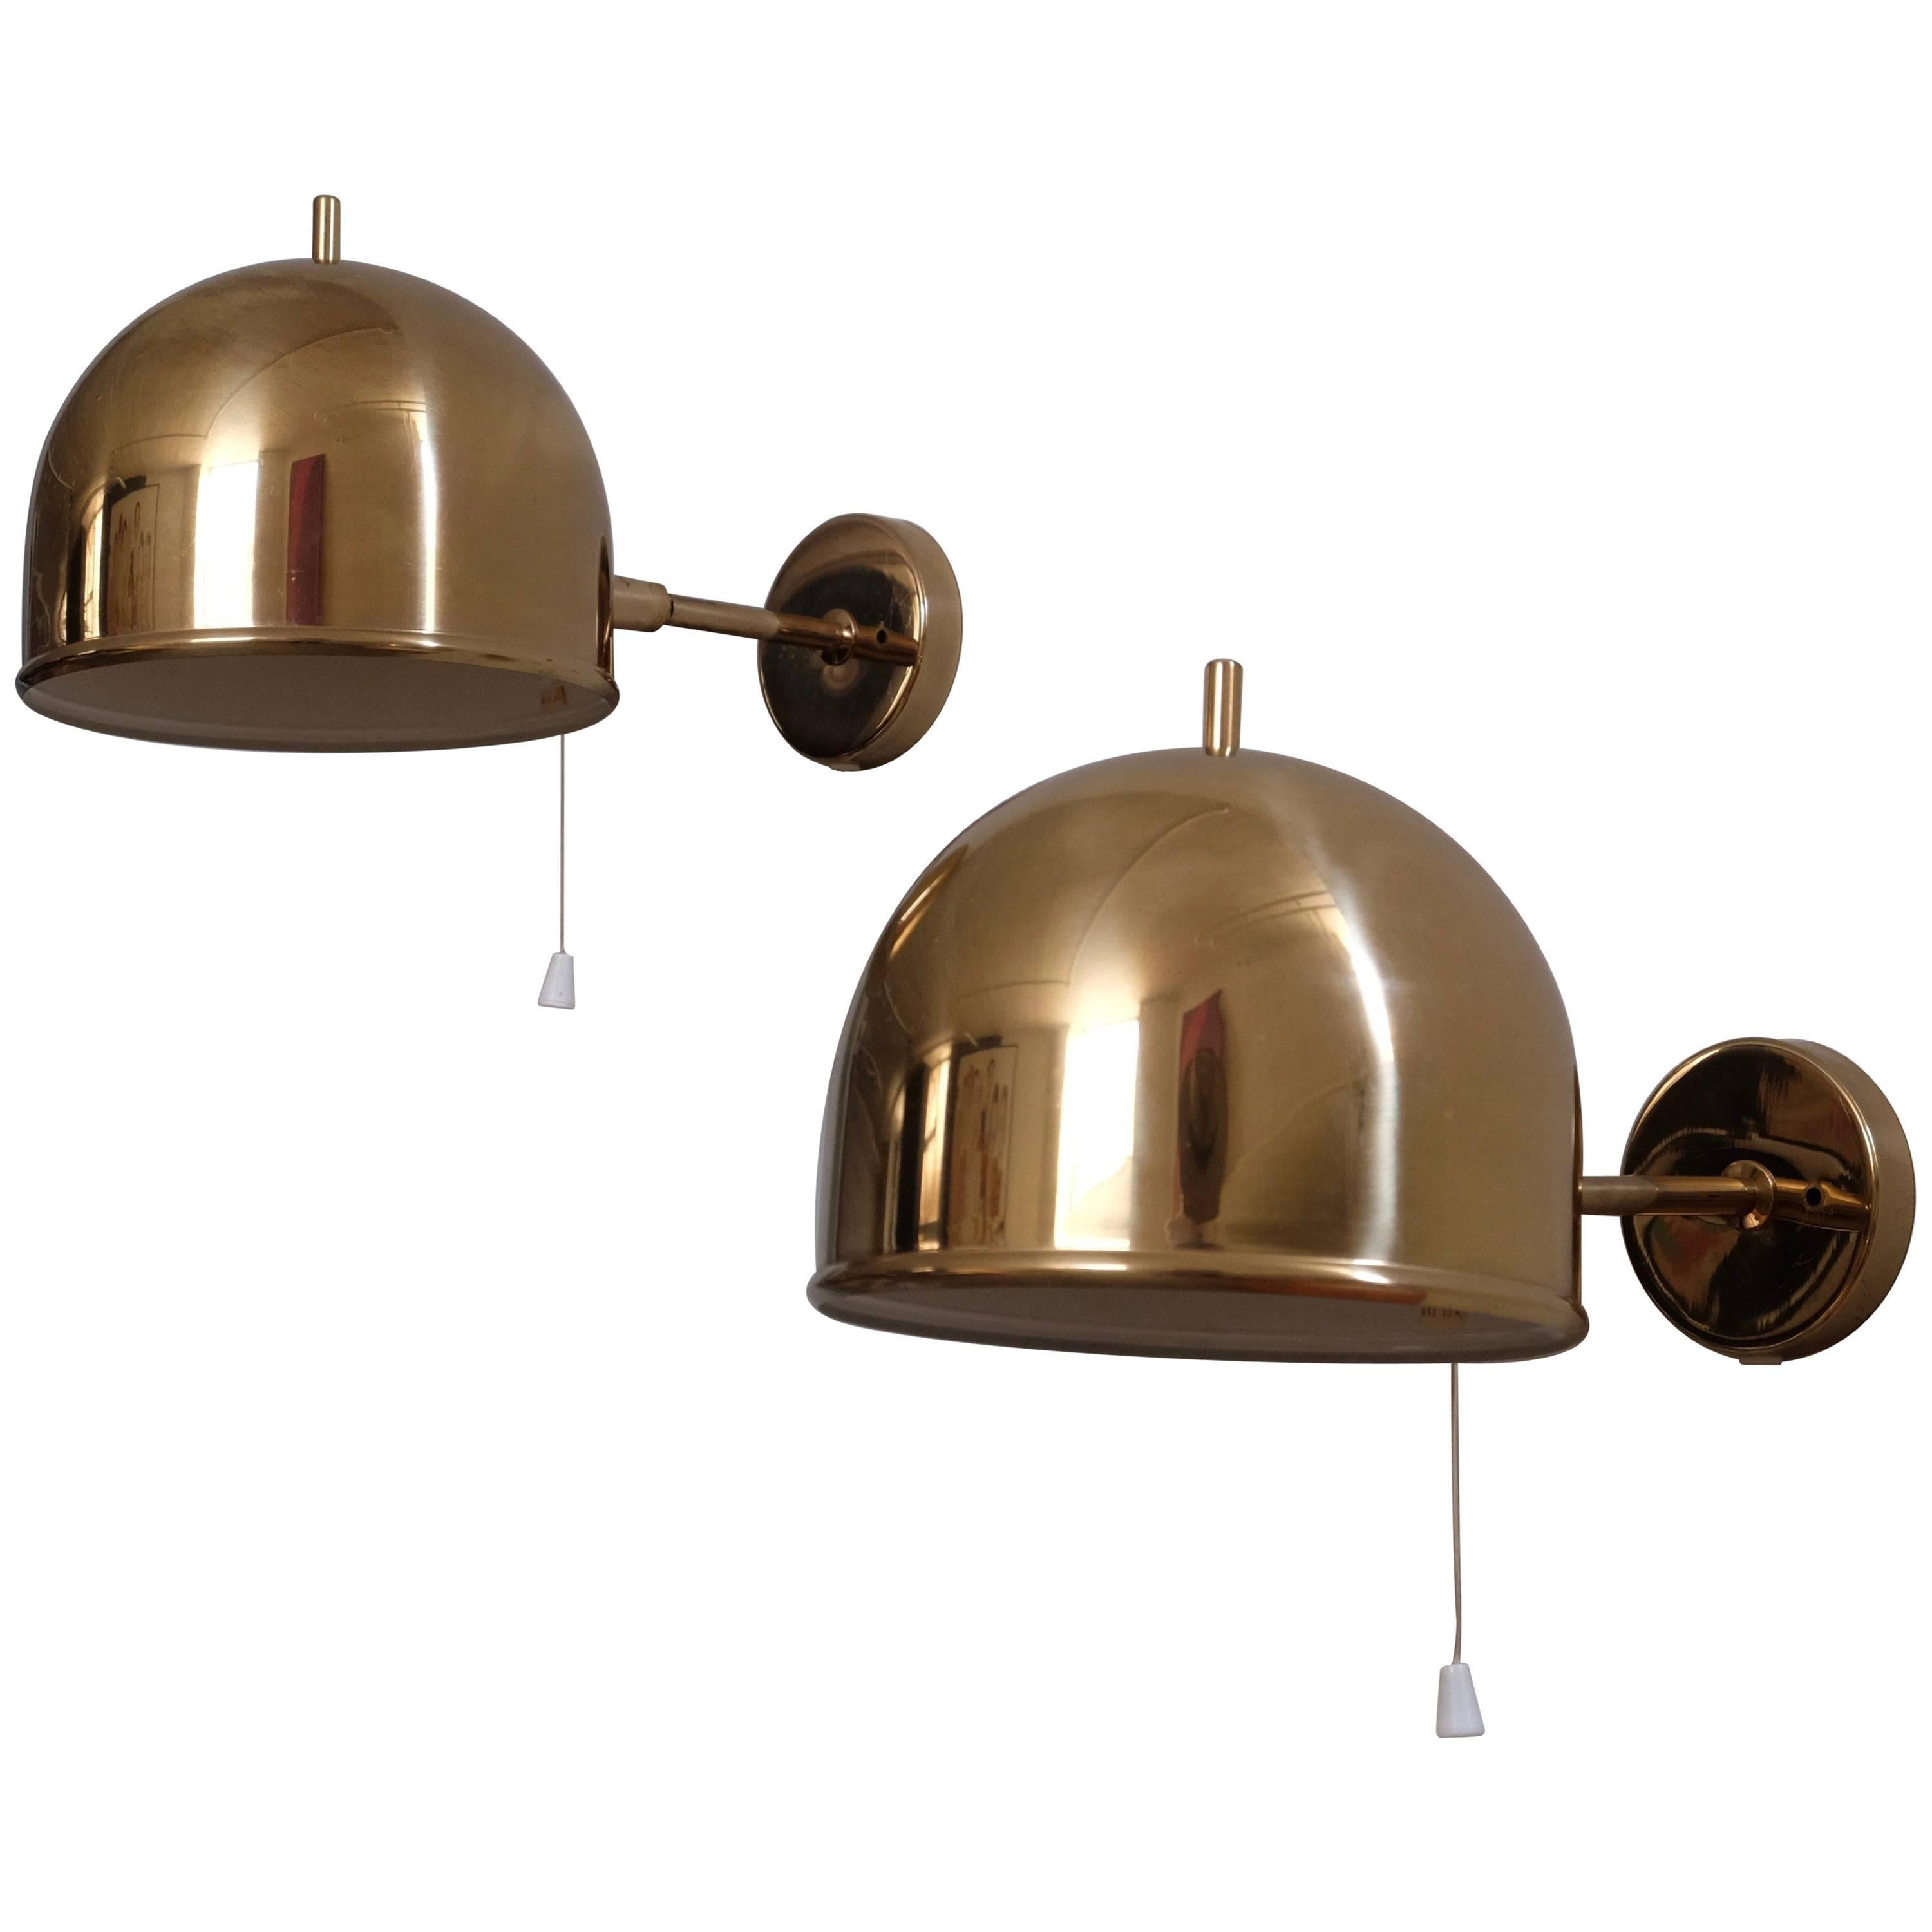 Pair of Brass Wall Lamps, Model G-075, Bergboms, Sweden, 1960s